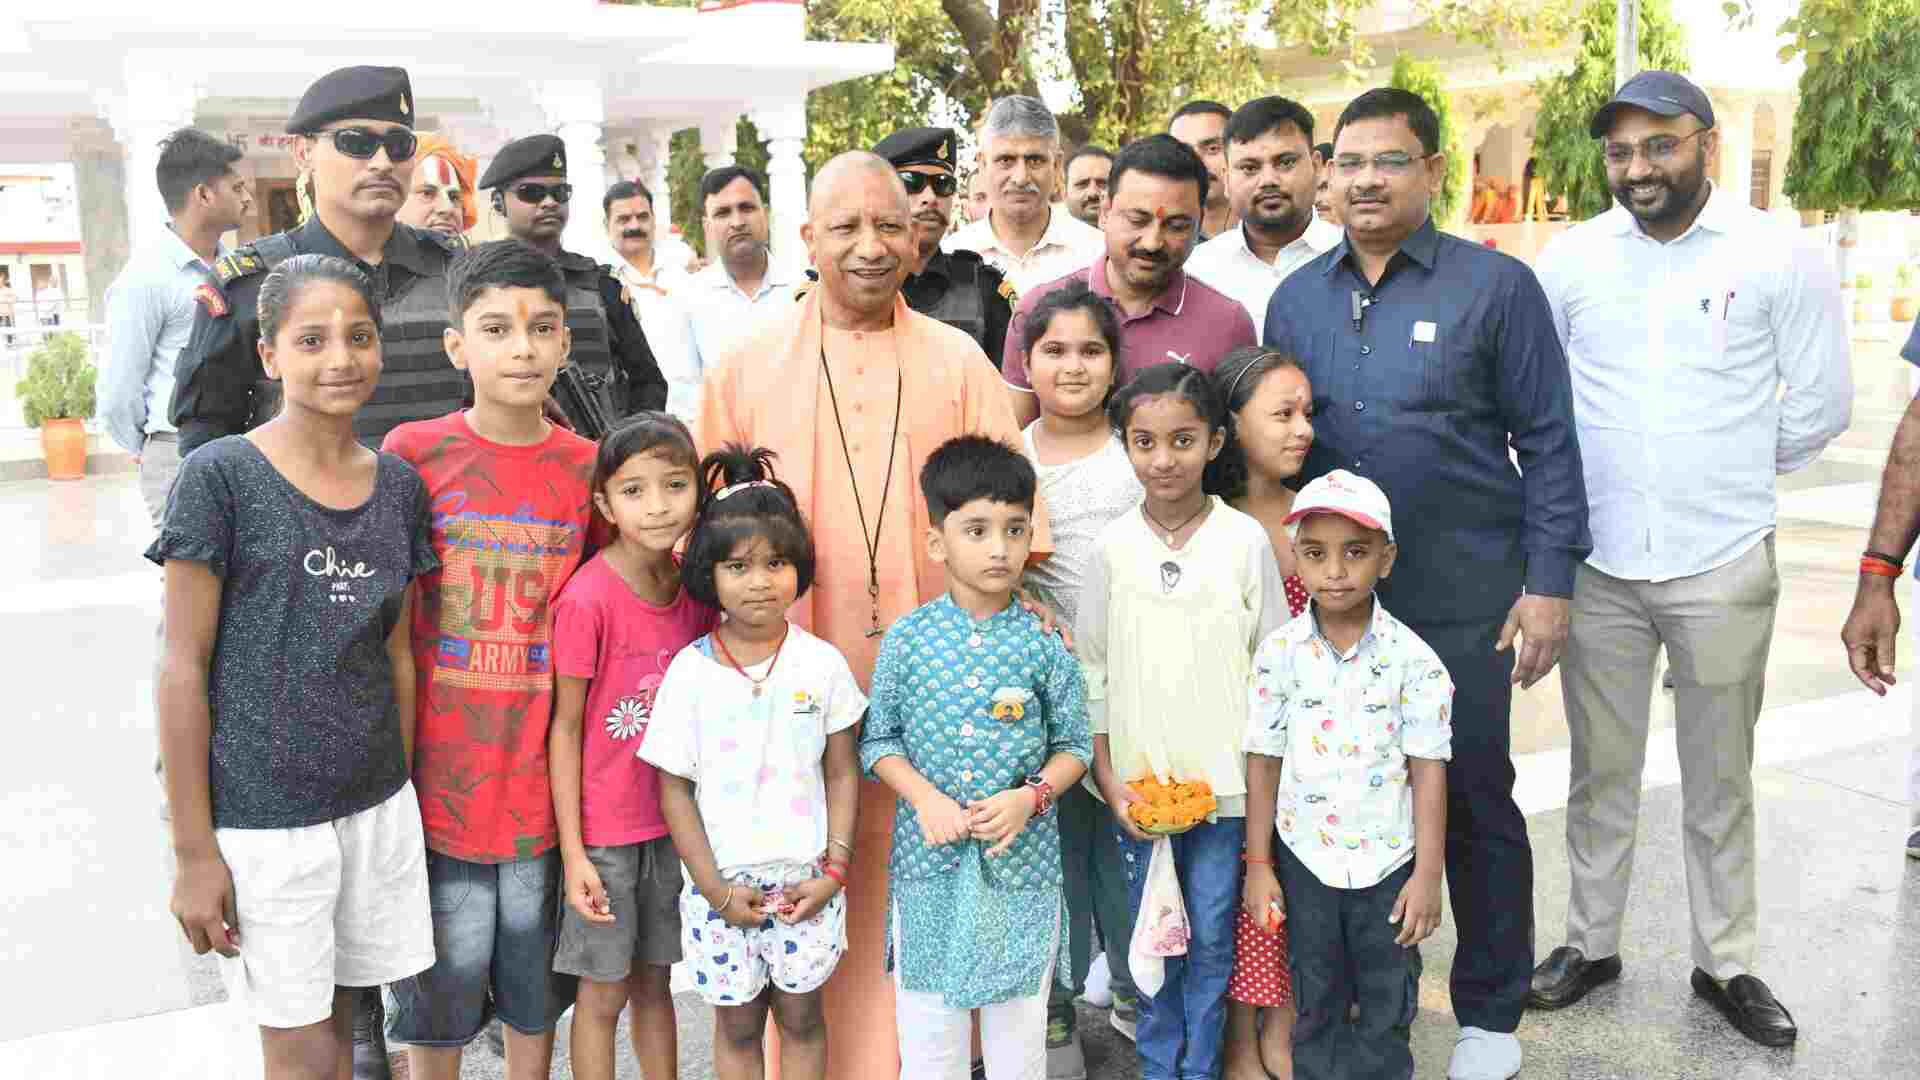 UP CM Offers Prayers At Gorakhnath Temple, Interacts With Children